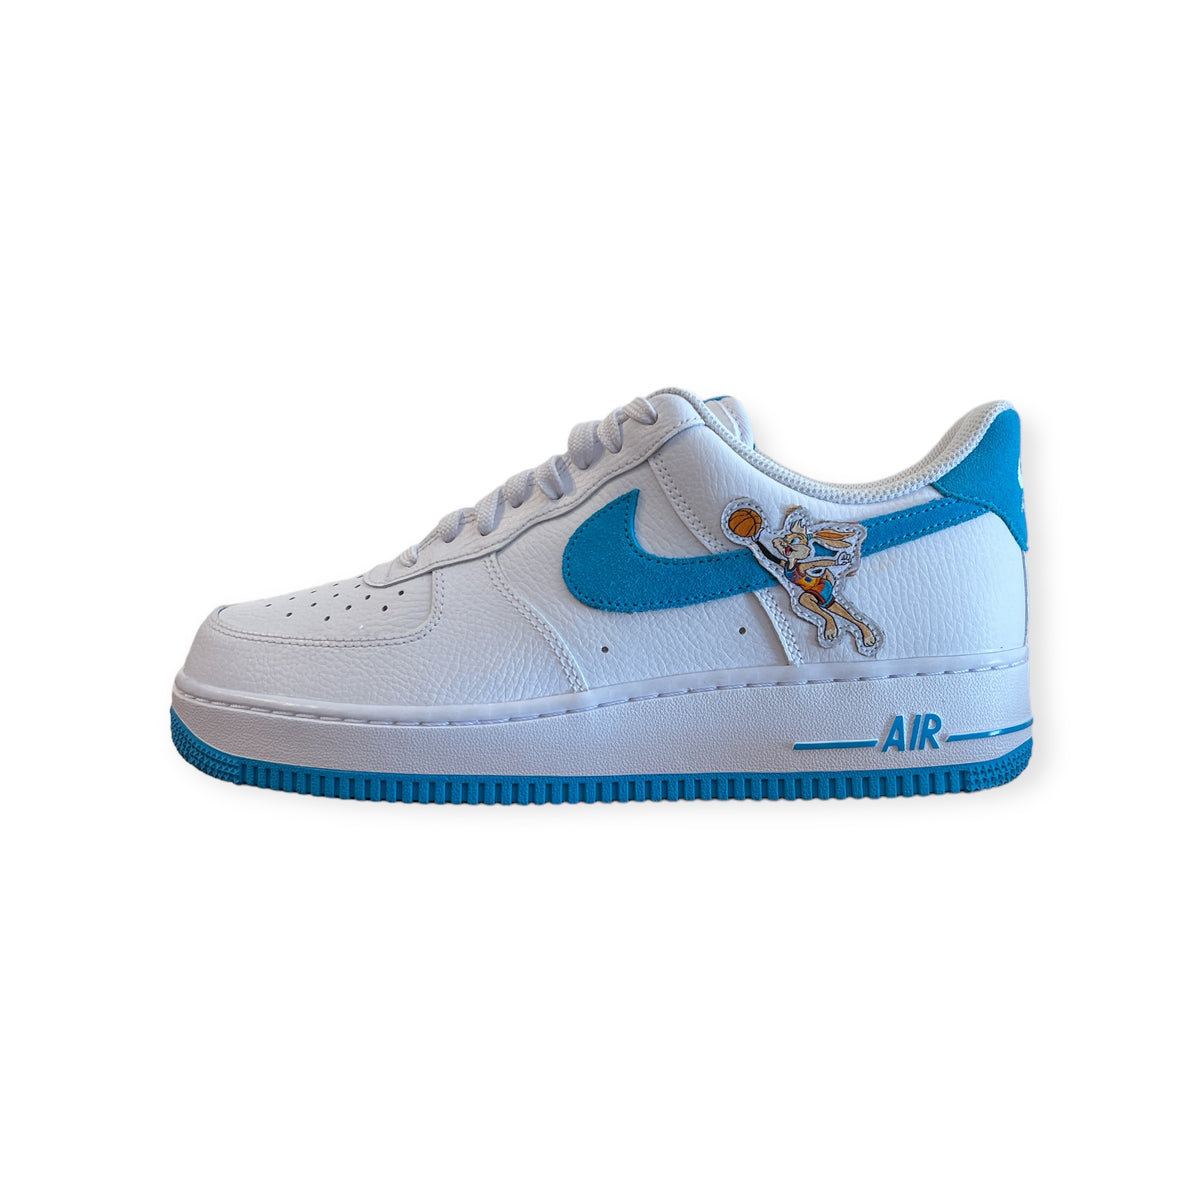 Space Jam X Air Force 1 '07 Low 'Hare' | Elite Laced